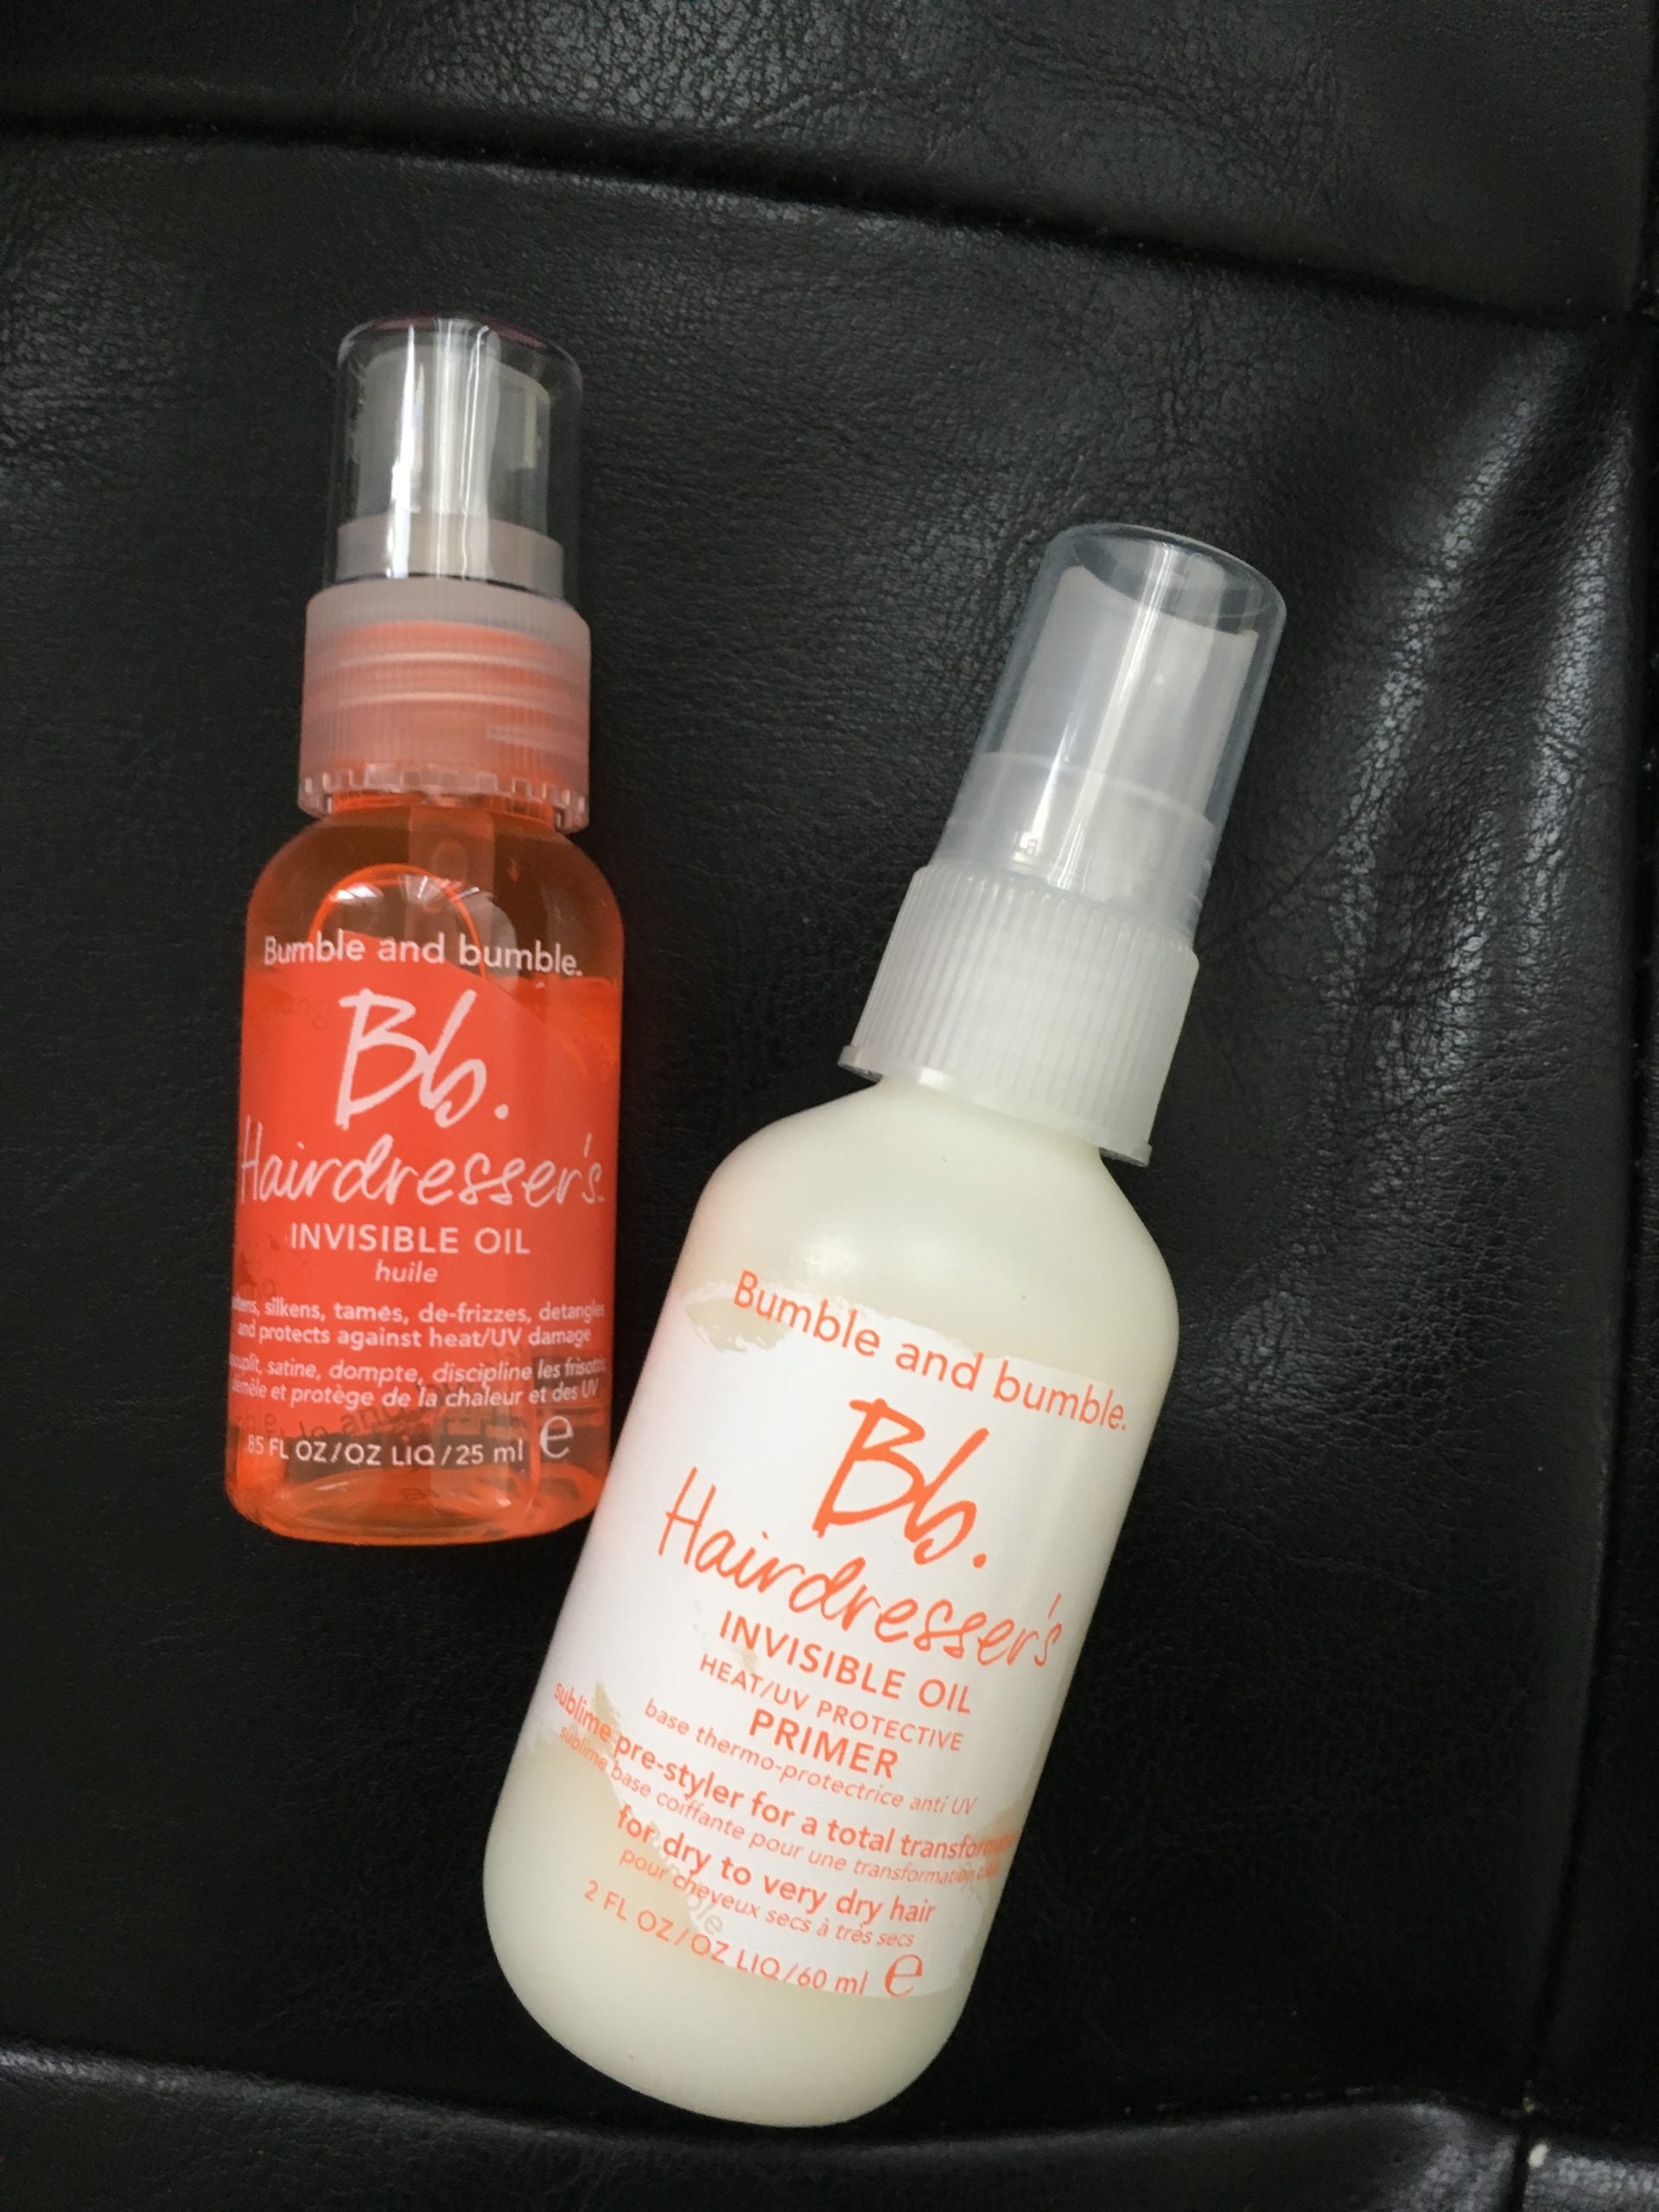 Review, Photos, Hairstyle, Haircare Trend 2019, 2020: Bumble & Bumble, Softness + Shine Duo, Hairdresser's Invisible Oil, Hair Primer